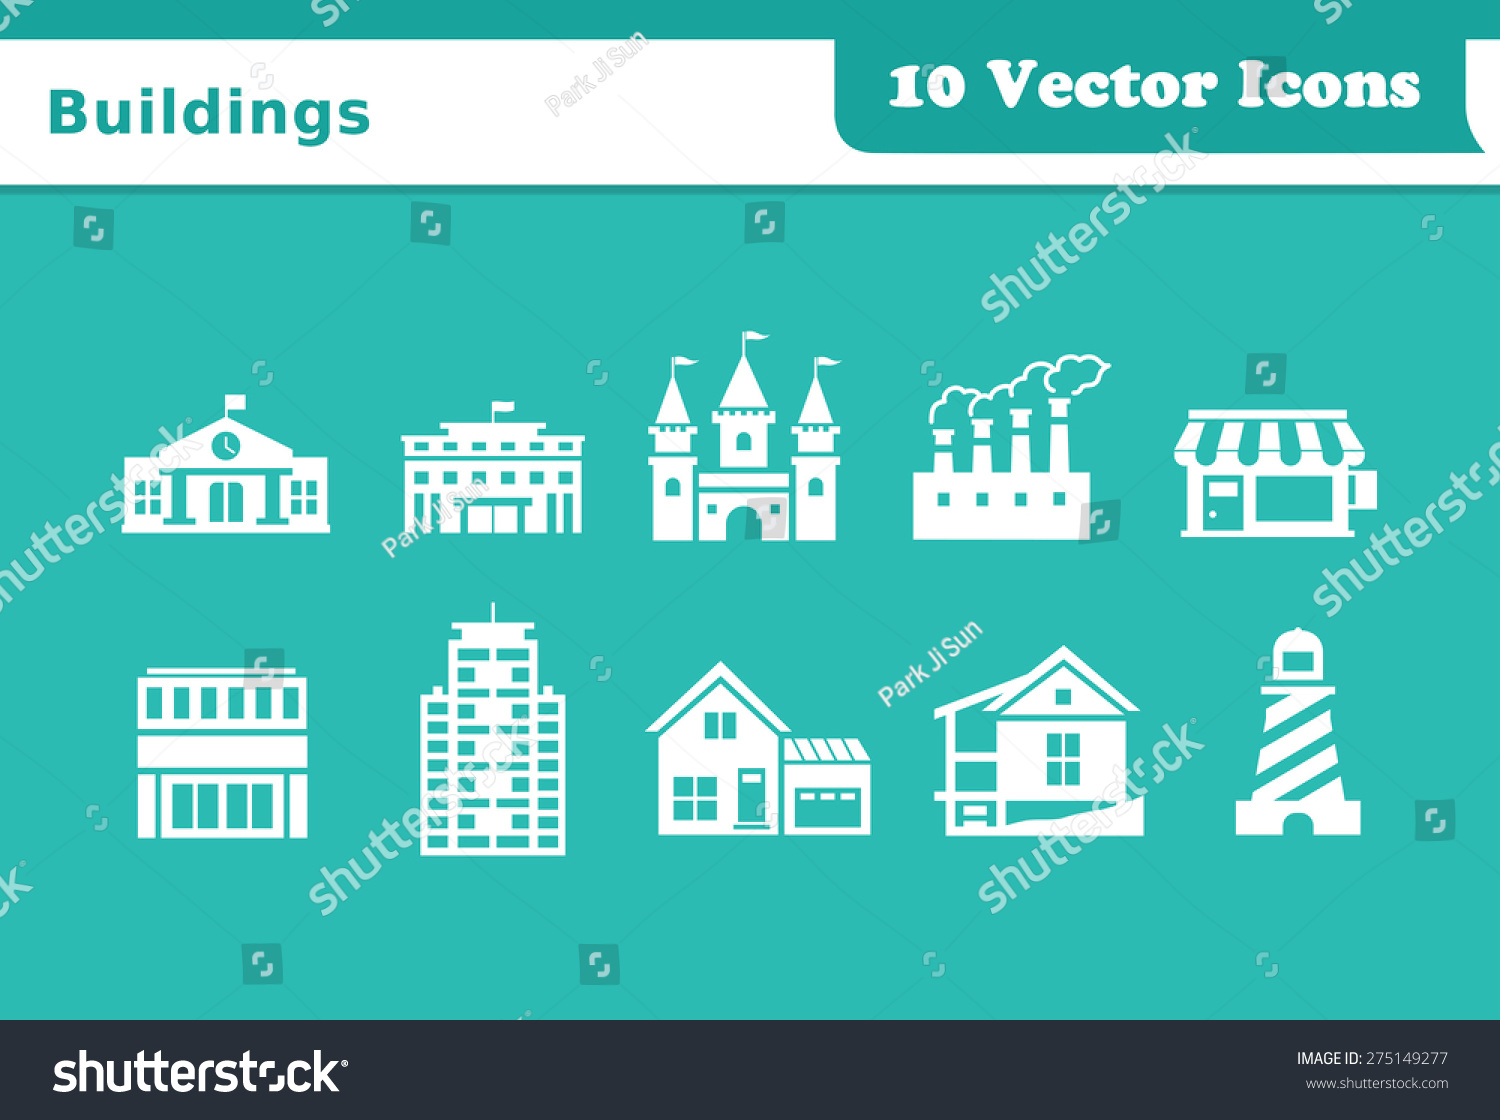 SVG of Buildings Vector Icons svg